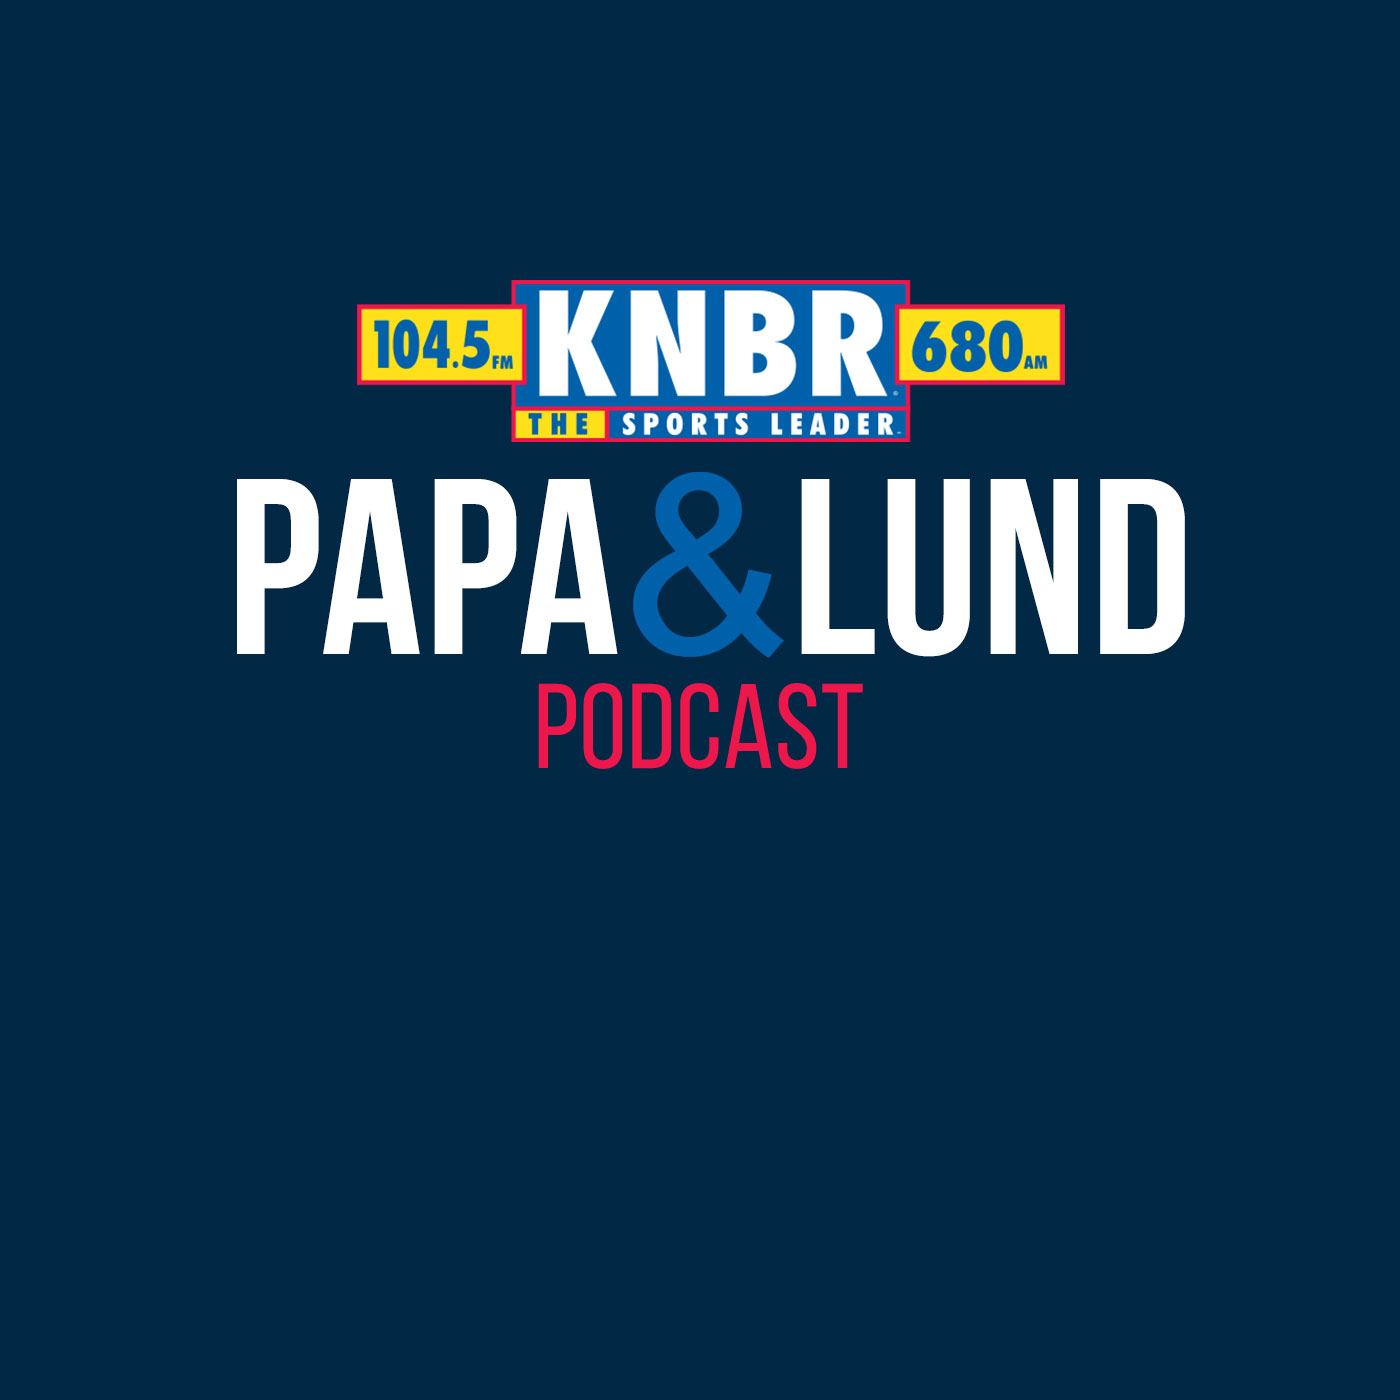 4-26 Papa & Lund Show - Hour 4 - Papa & Lund welcome in newest 49er WR, Ricky Pearsall